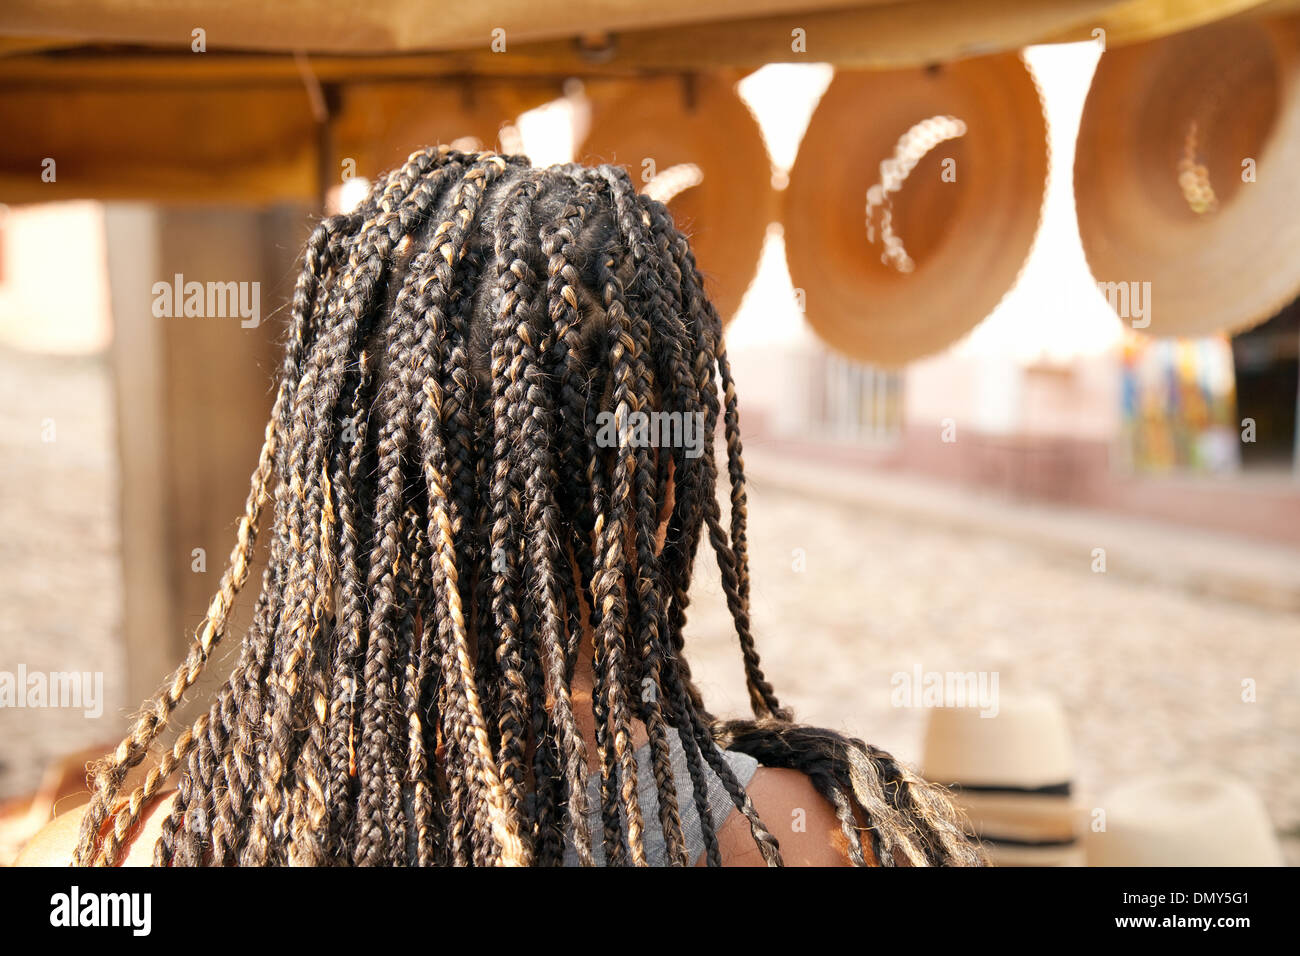 A young black woman with braided hair braids, example of local culture, Cuba, Caribbean, Latin America Stock Photo